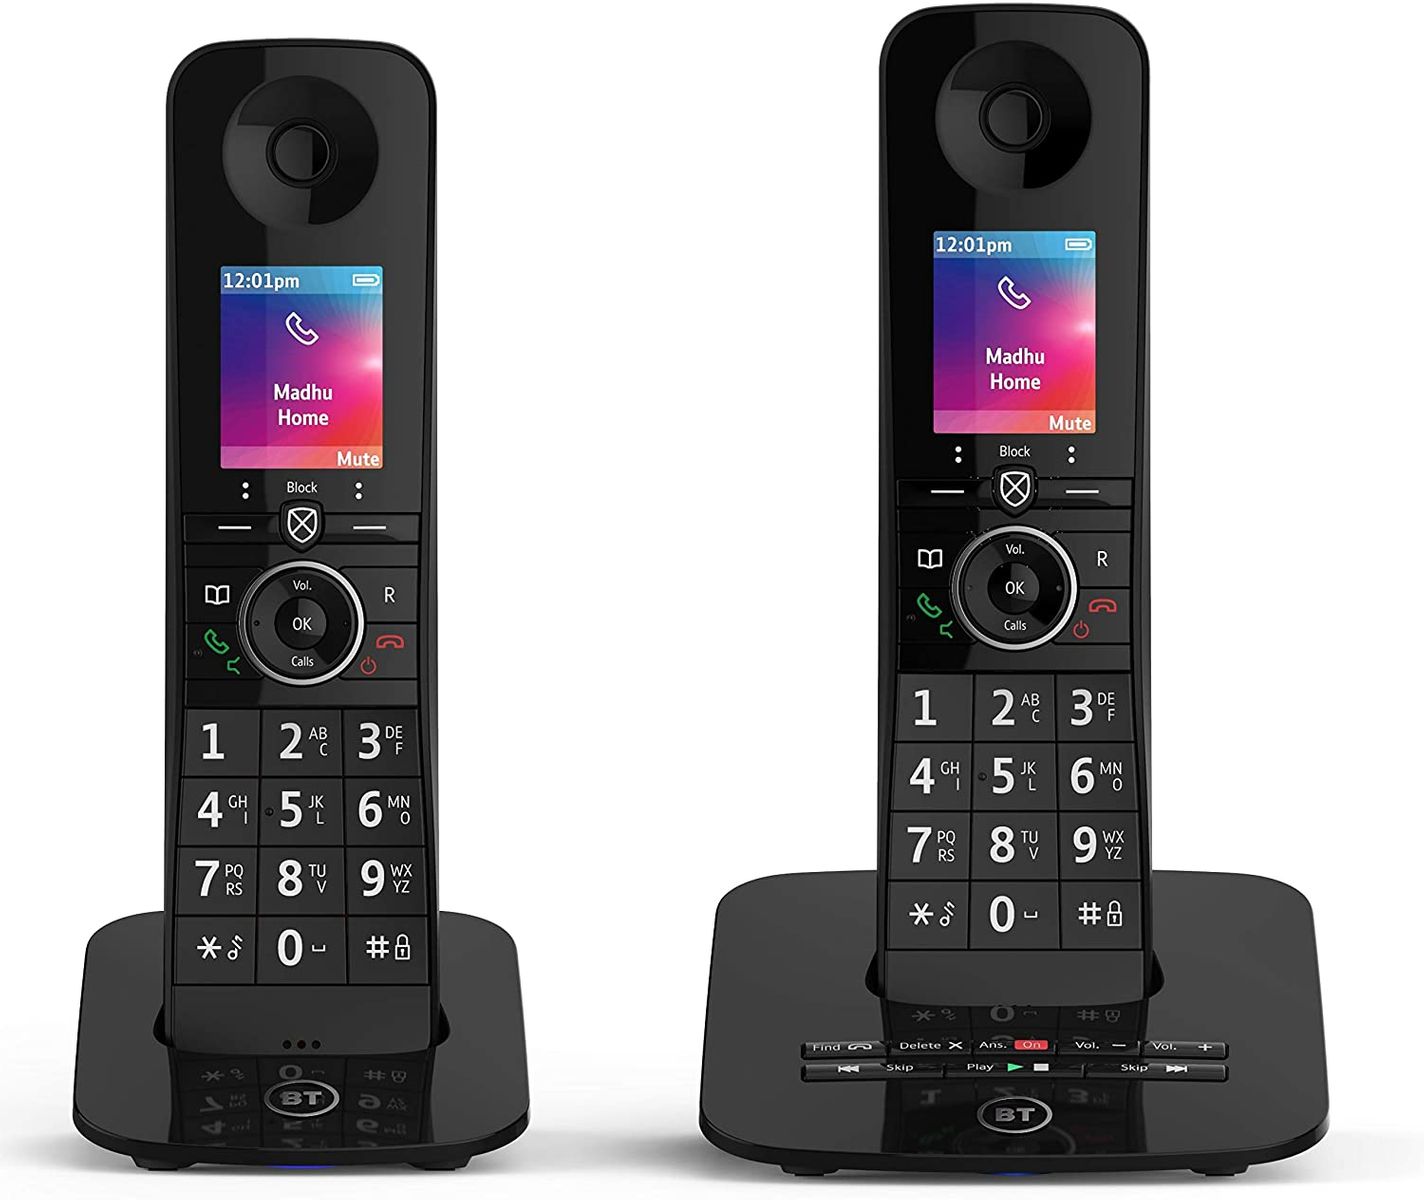 BT Premium Wireless Home Phone with Disturbing Call Block, Mobile Sync and Answering Machine, Dual Handset, Black